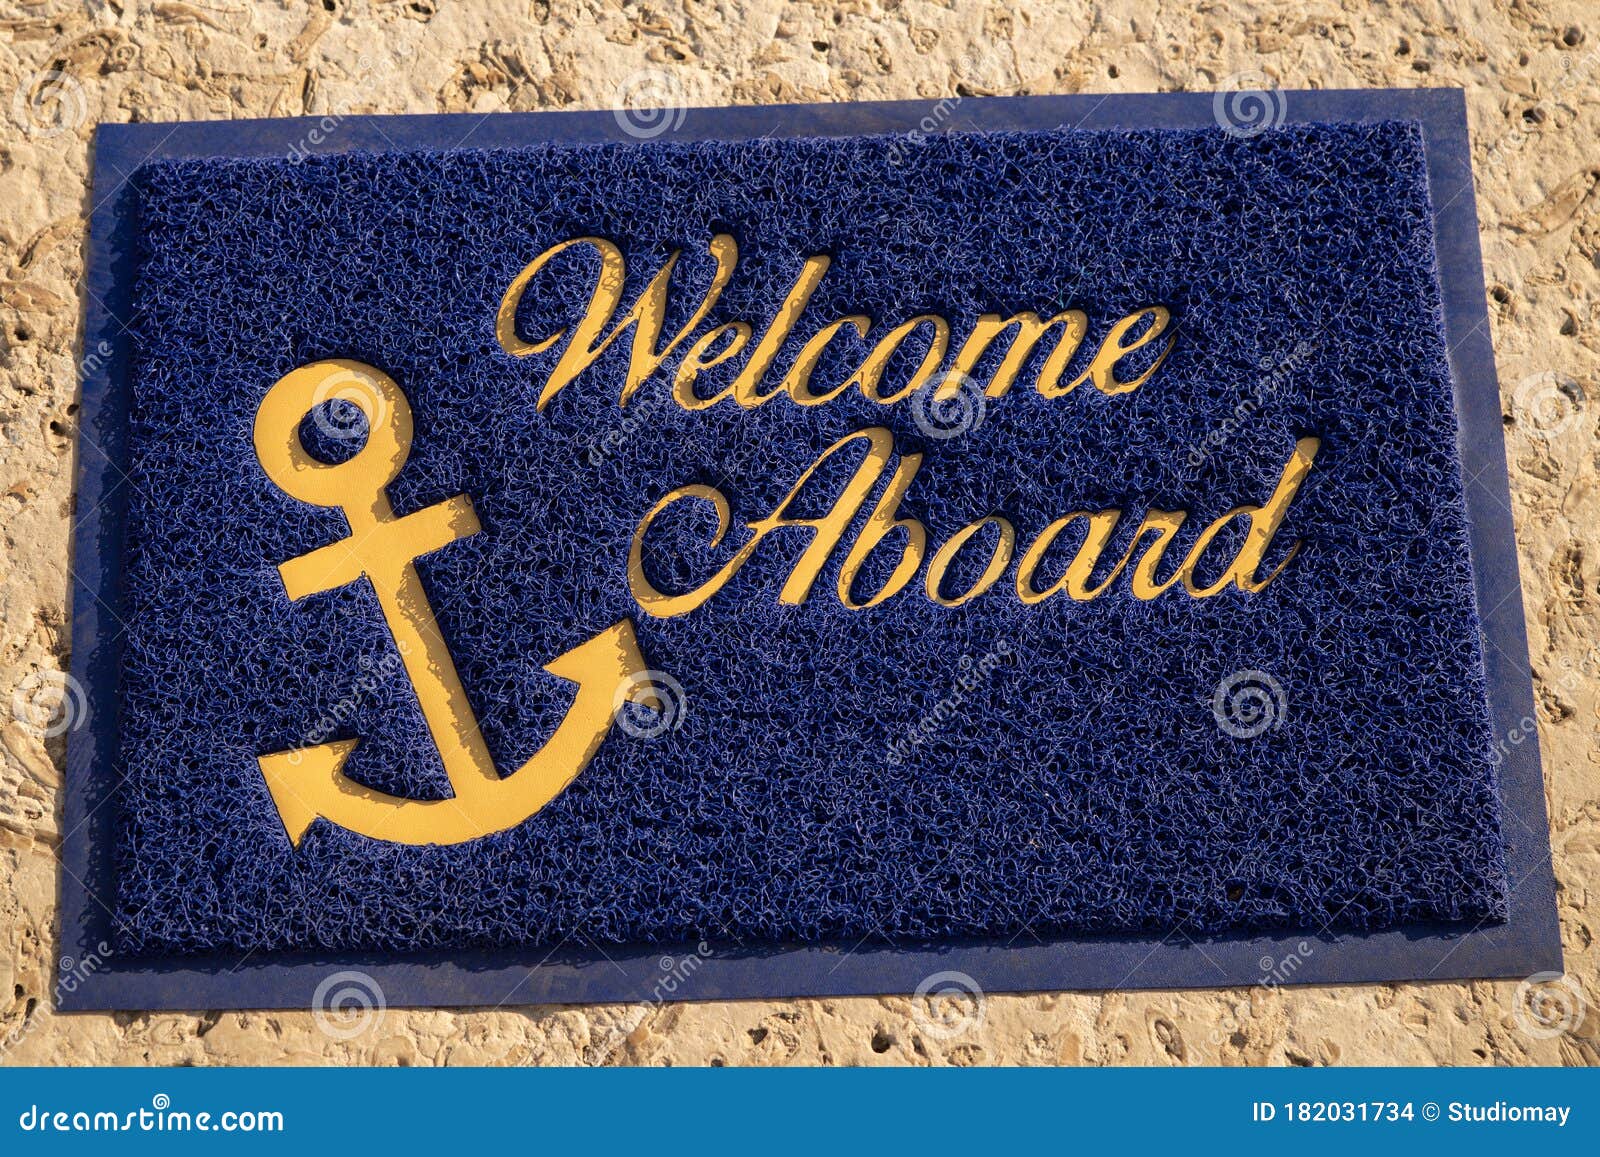 welcome aboard blue mat. beach cafe, yacht club wellcome concept